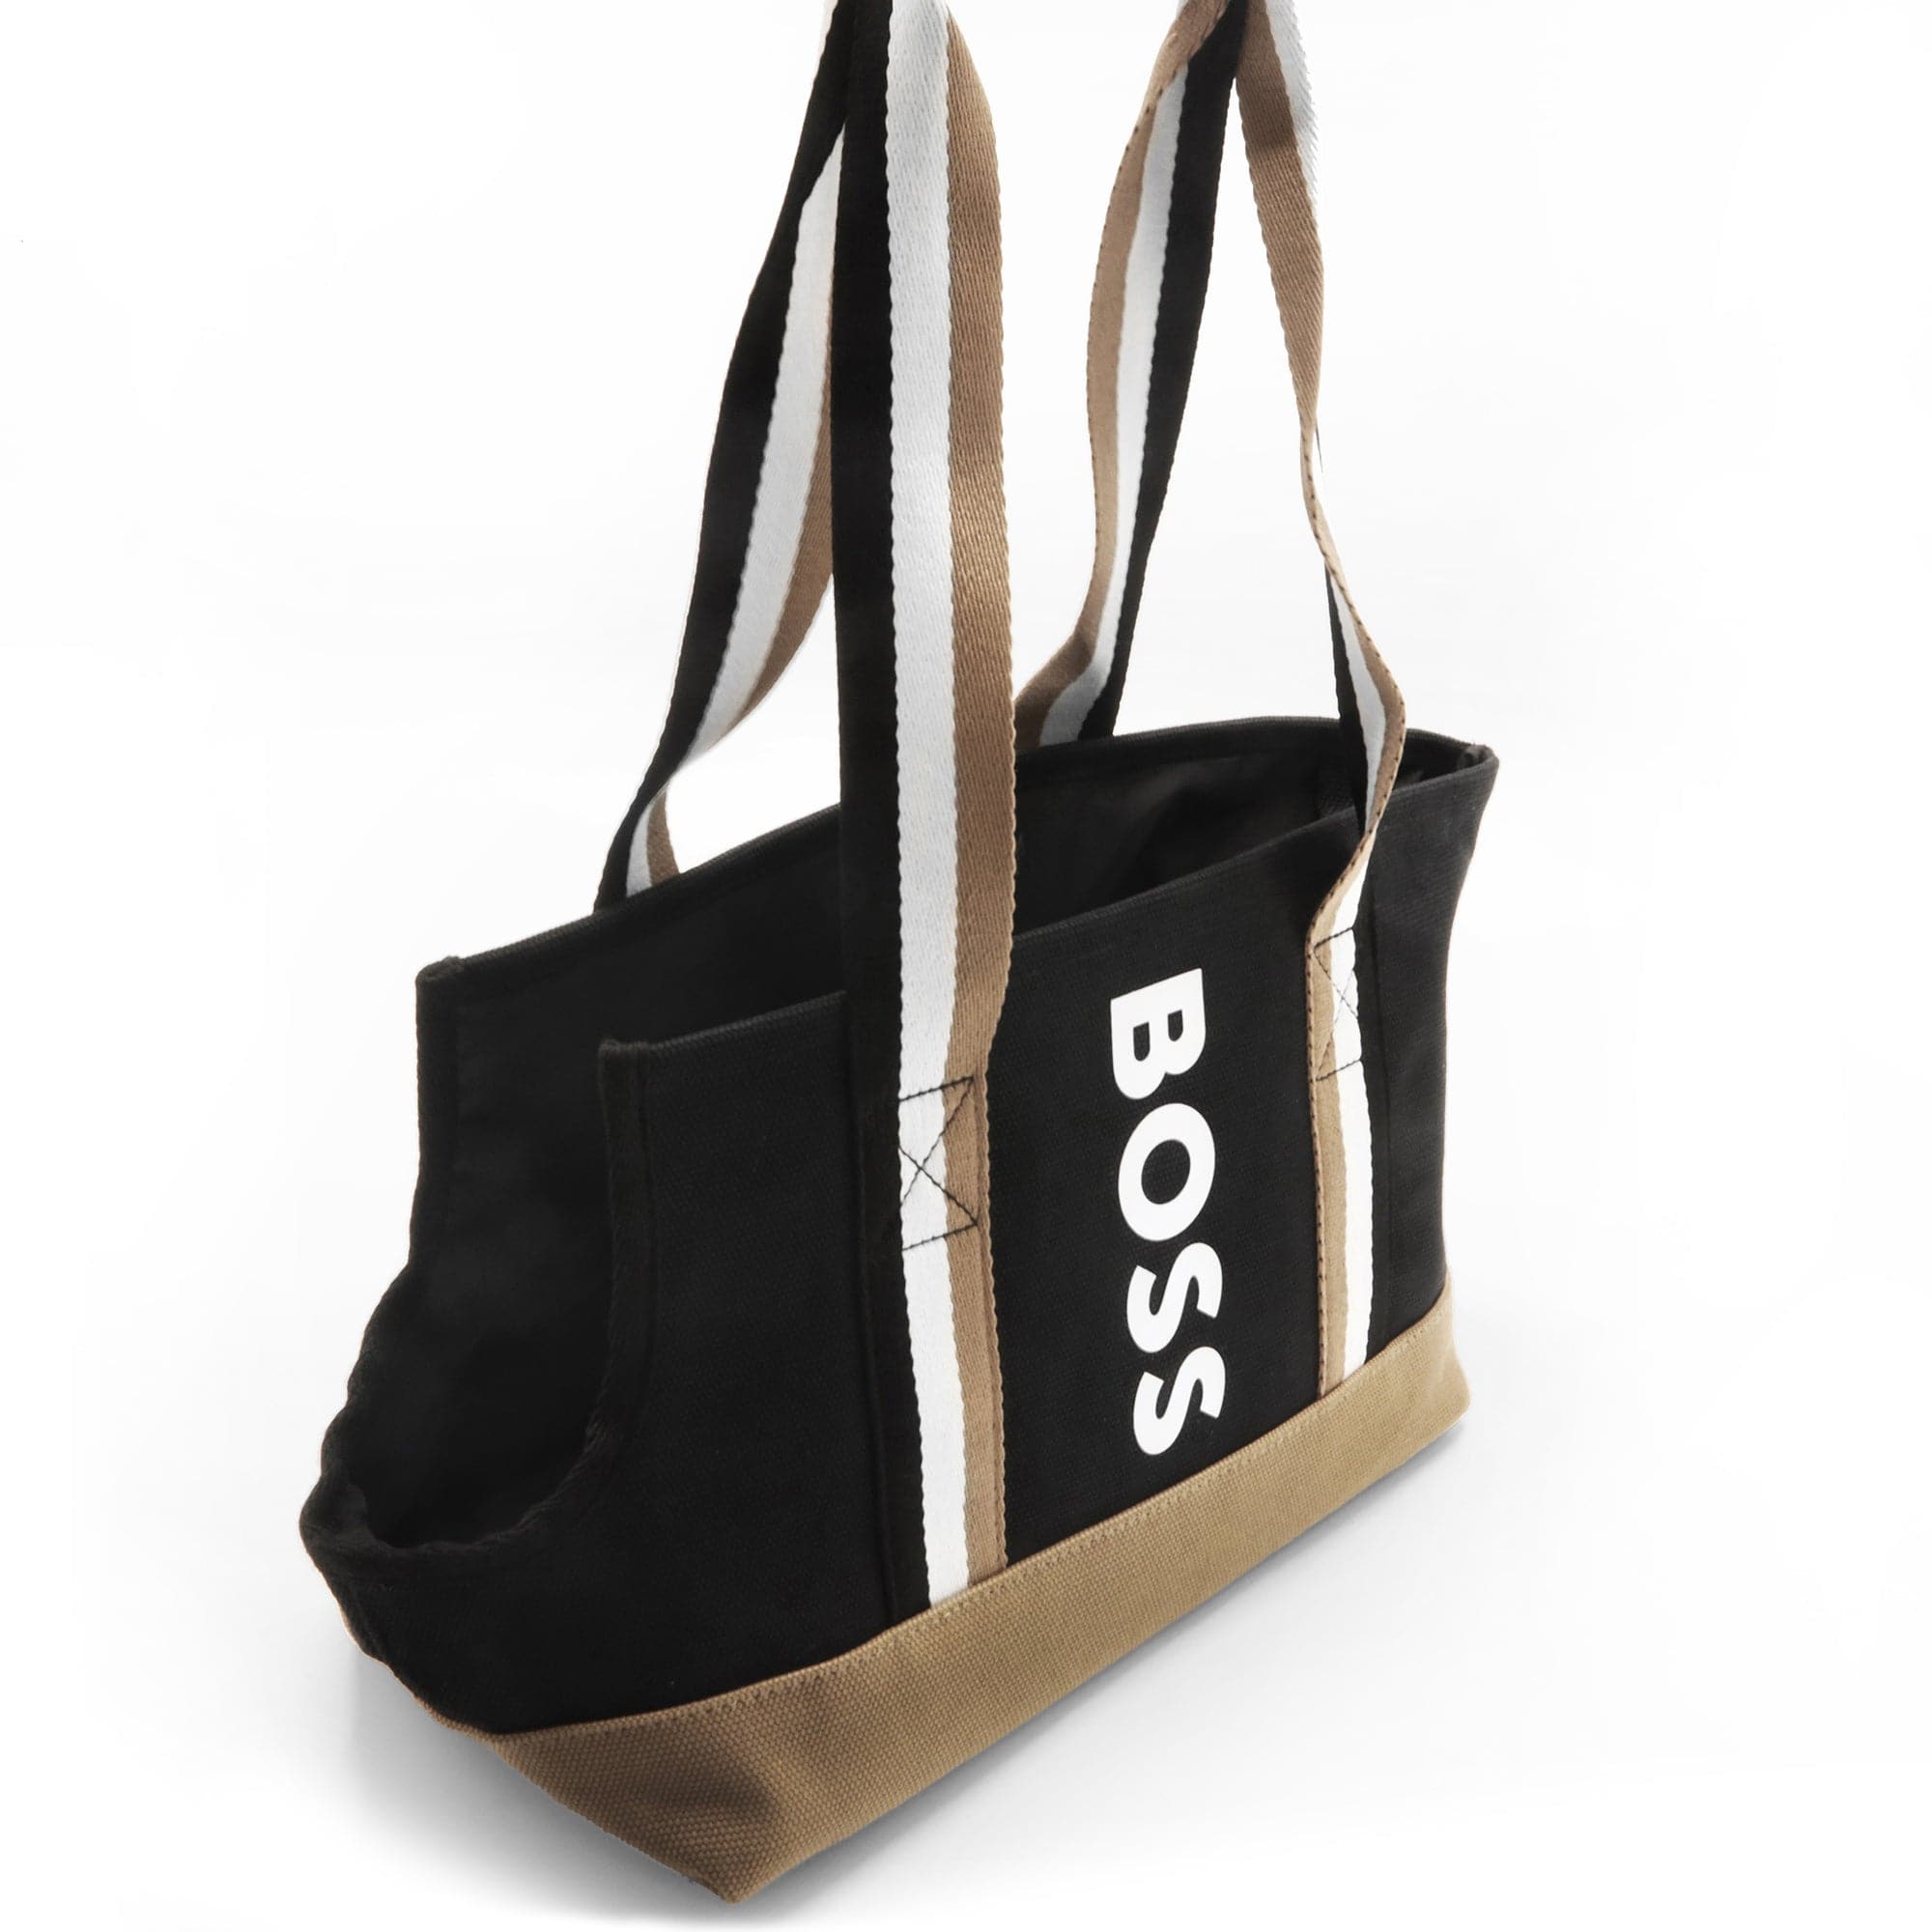 With Love Boss Lady Canvas Tote Bag